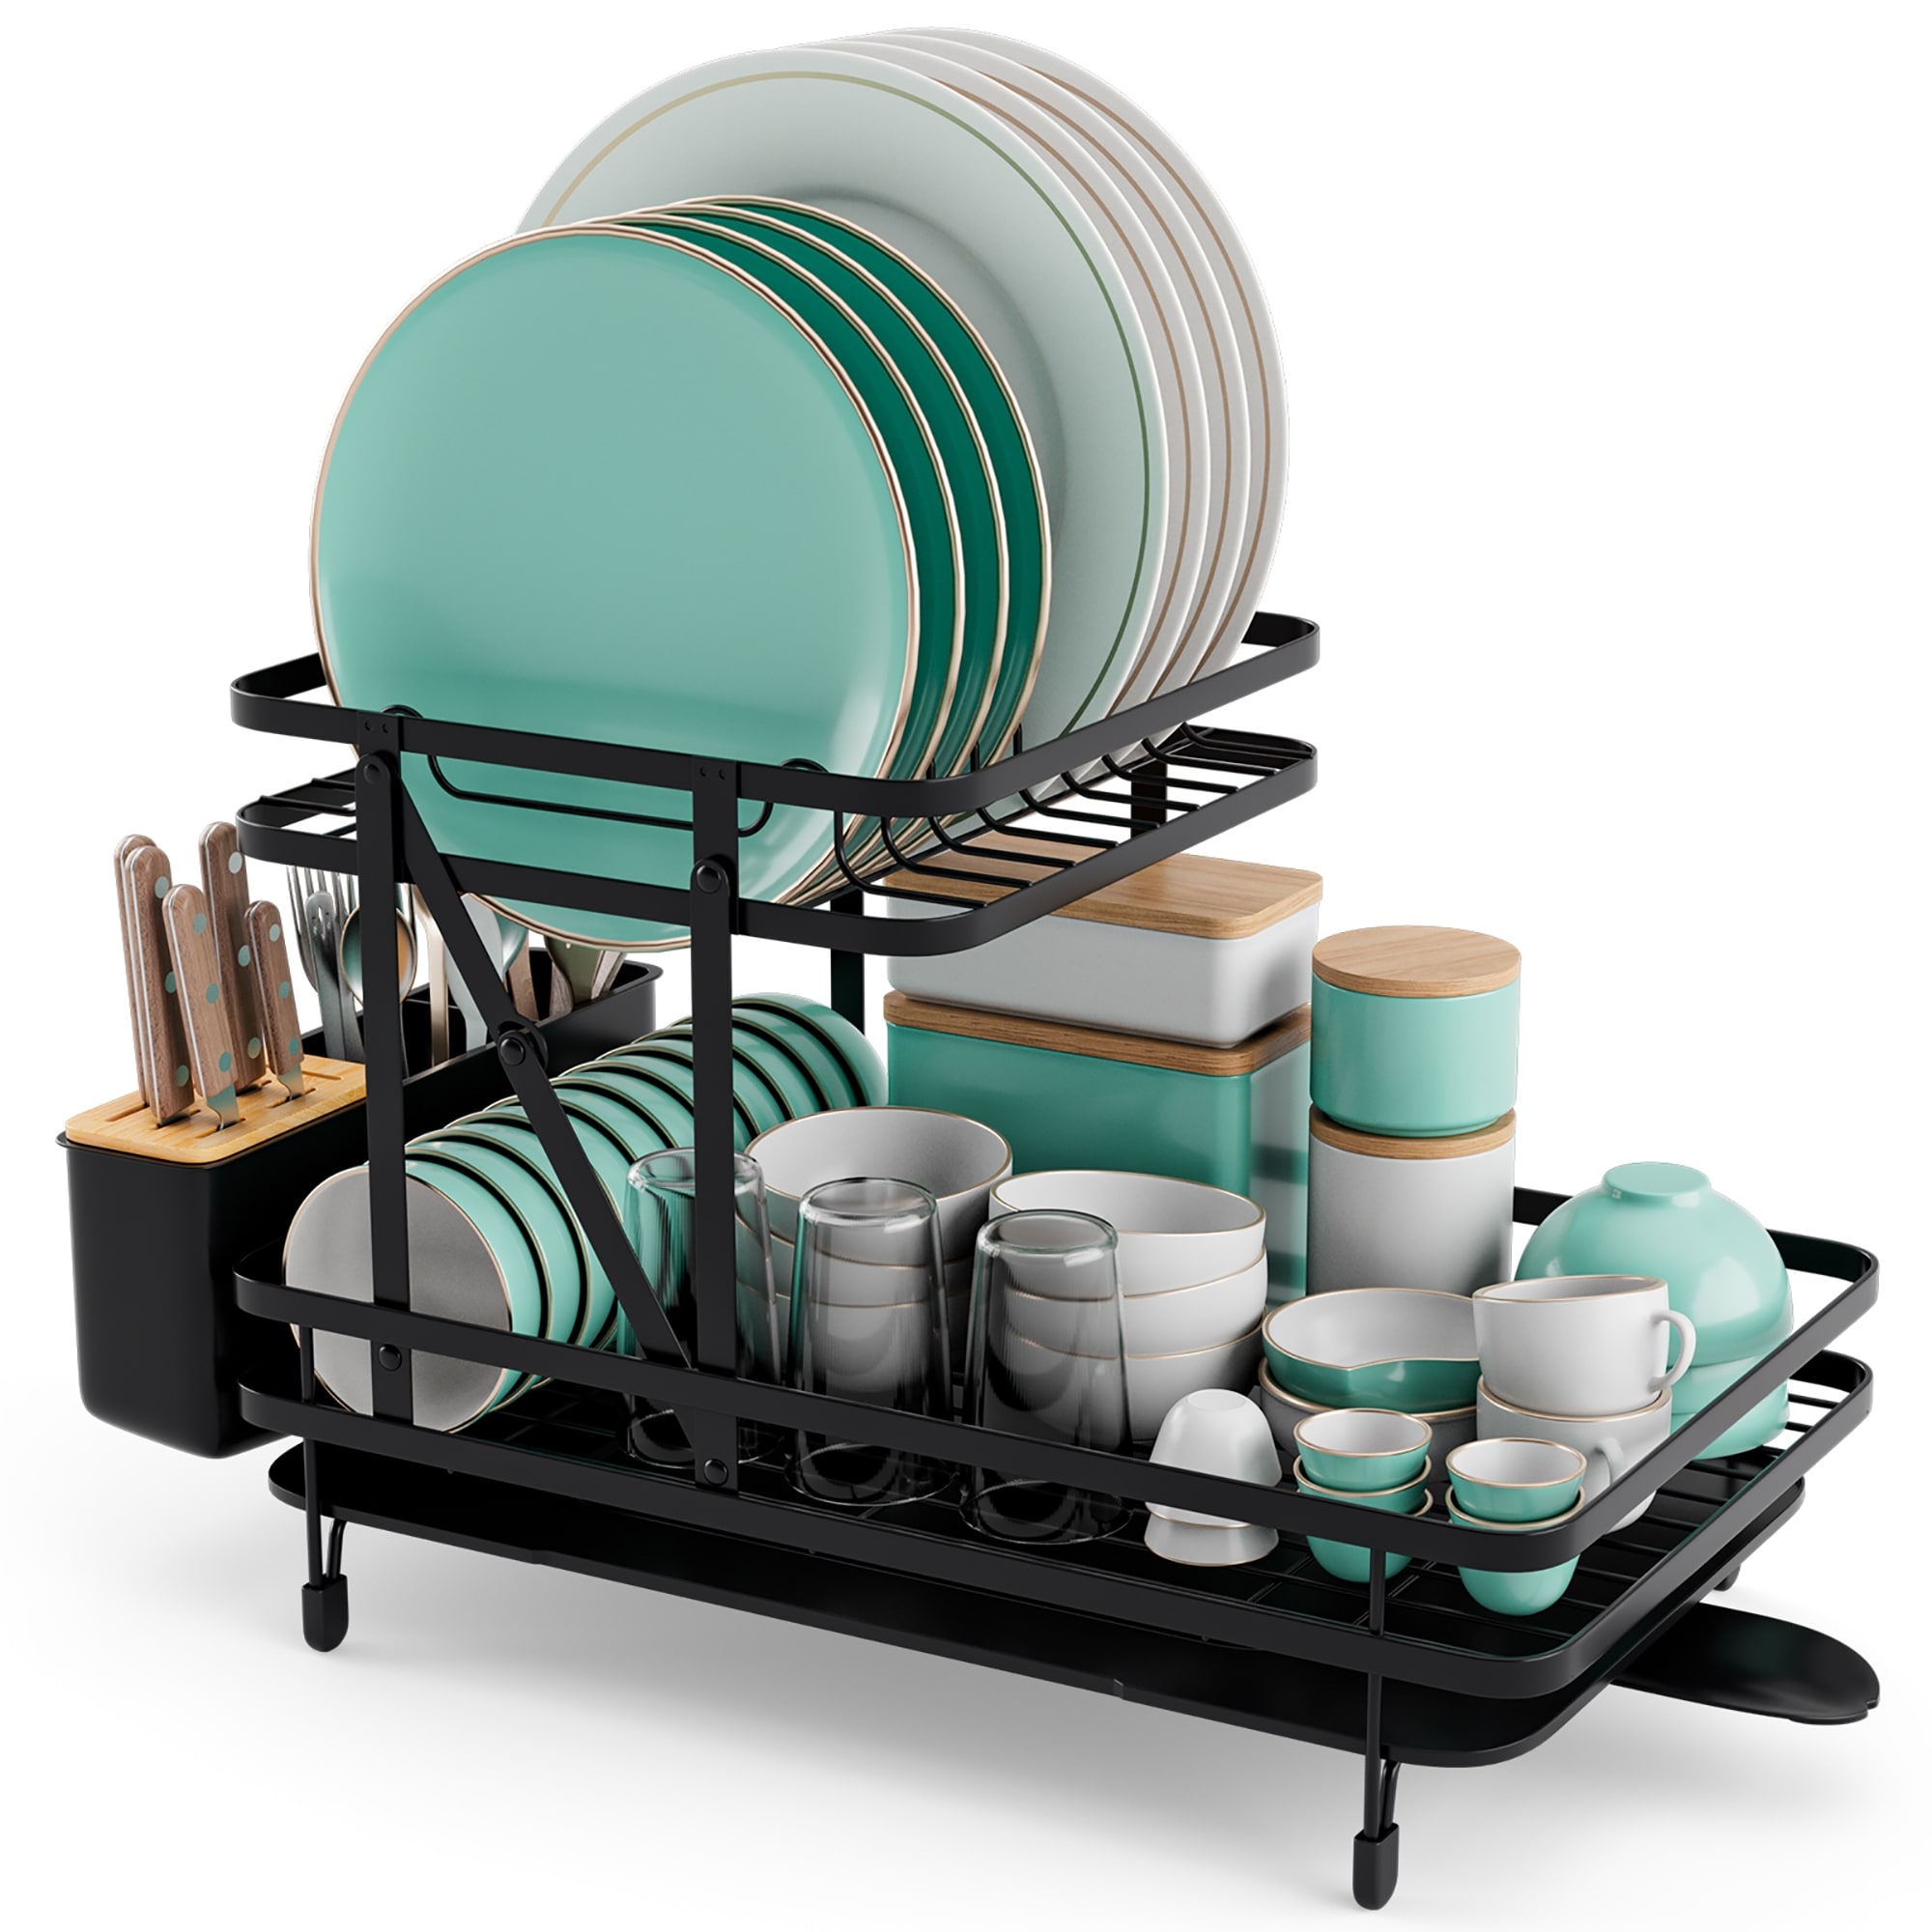 2 Tier Large Drying Rack with Drainboard Set Glass Utensil Holder